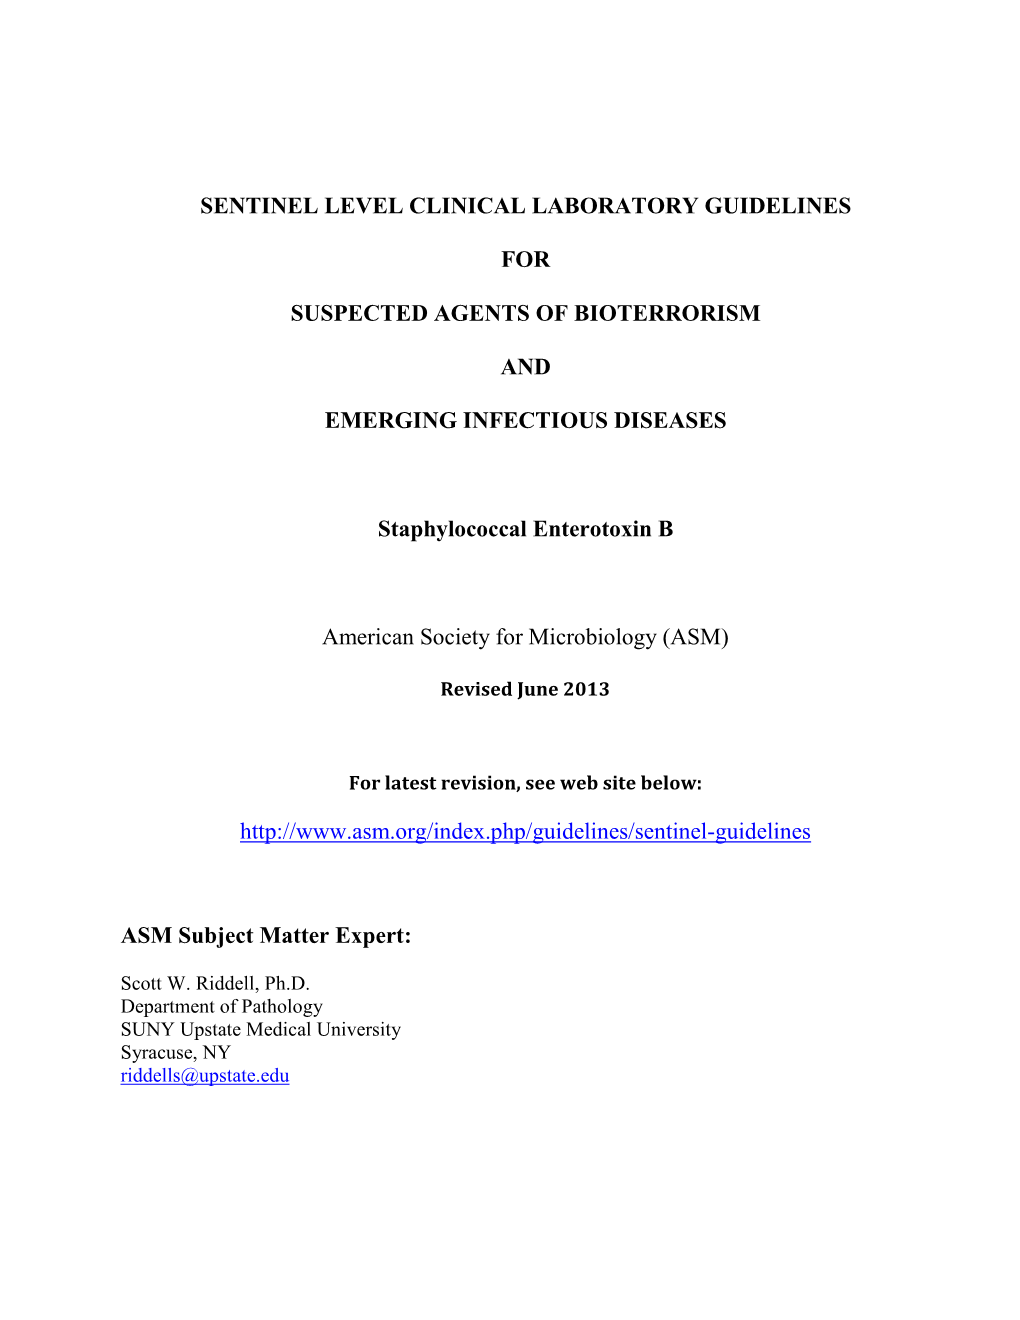 Sentinel Level Clinical Laboratory Guidelines for Suspected Agents Of